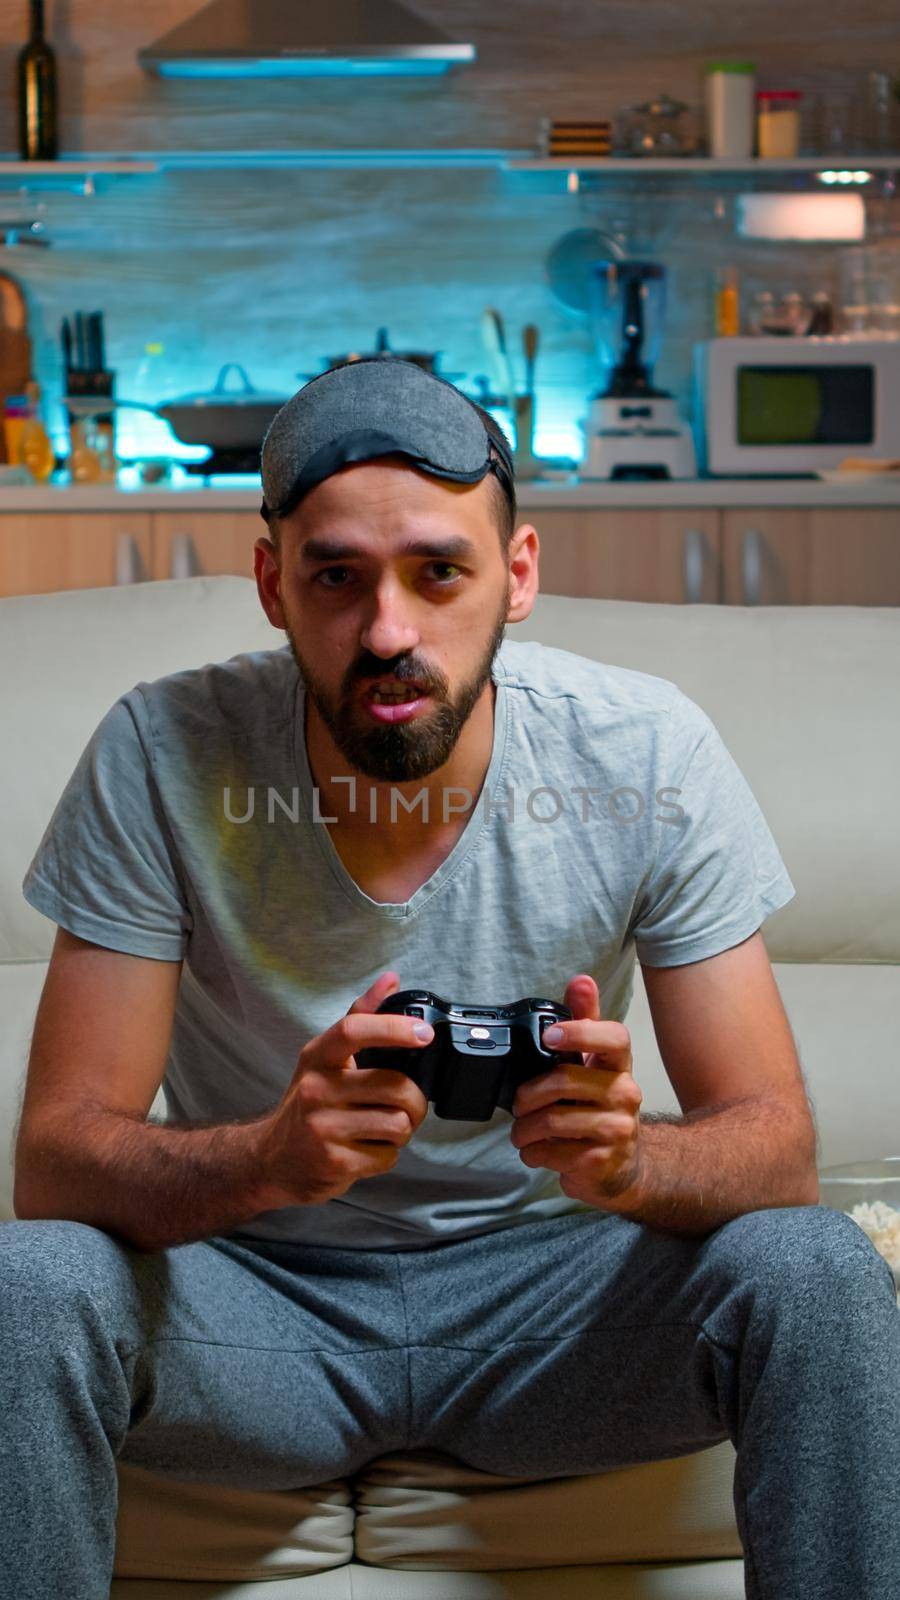 Focused man holding joystick while sitting in front of television by DCStudio